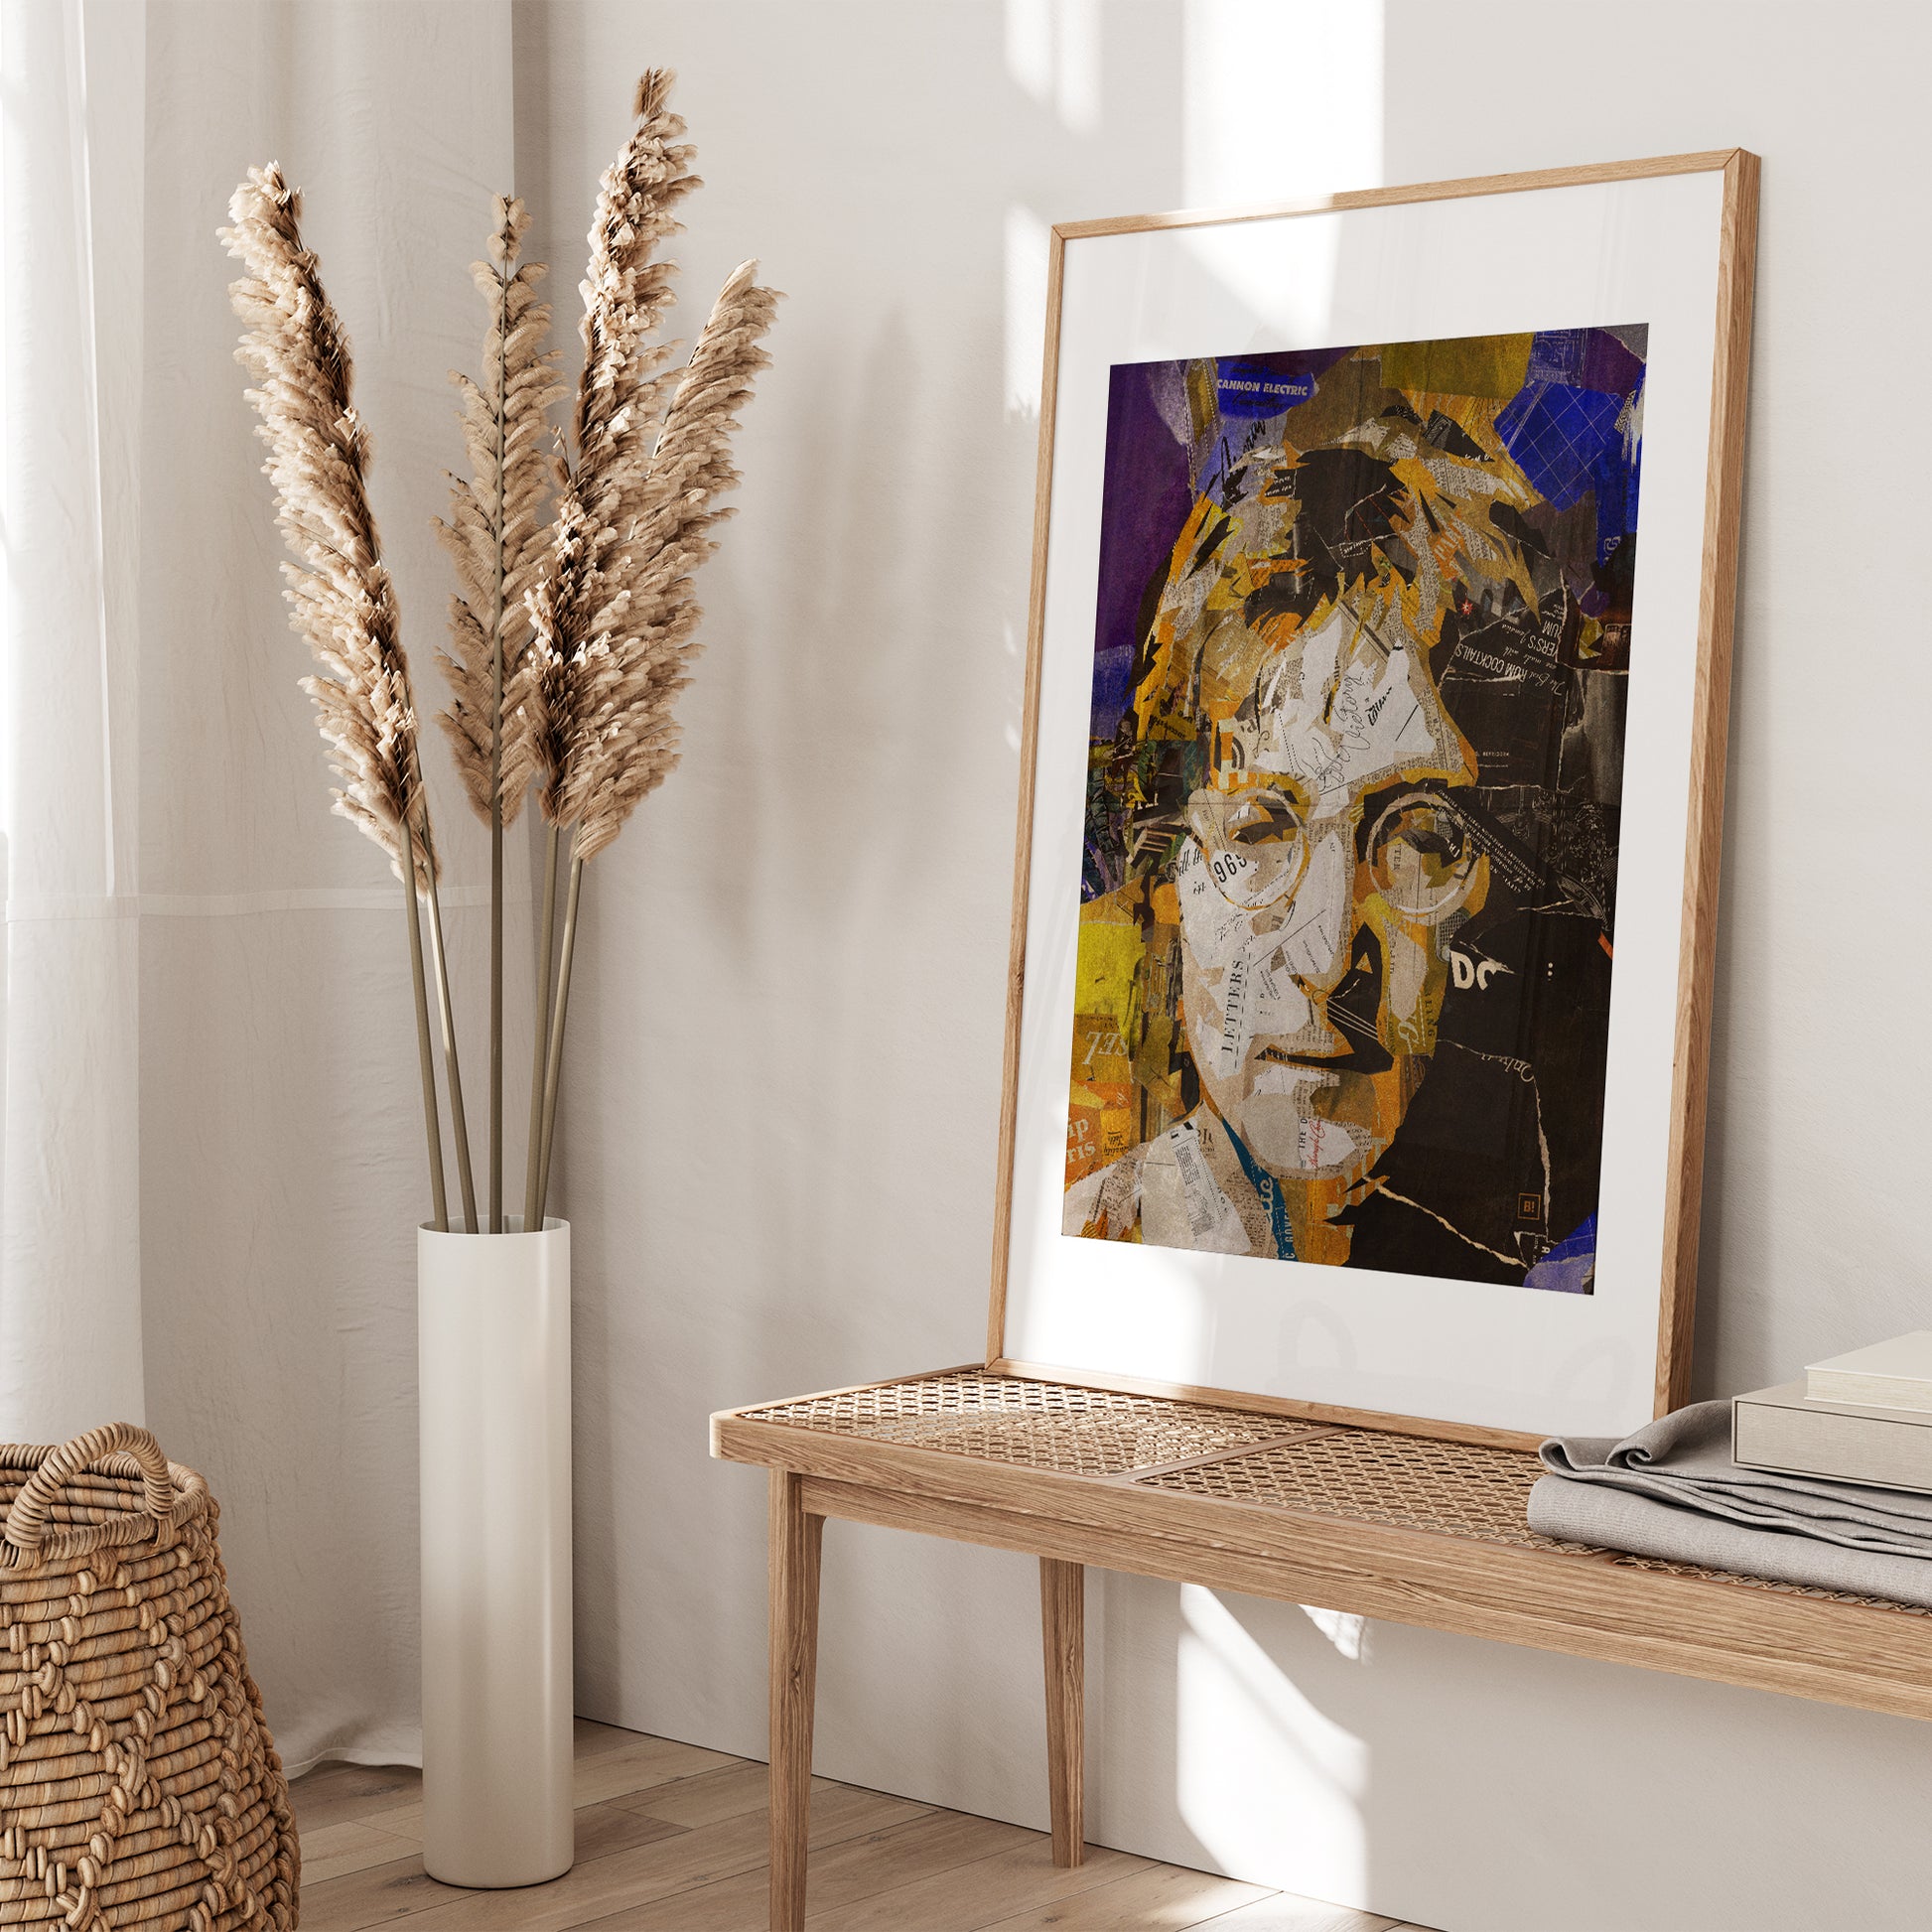 Be inspired by our iconic collage portrait art print of John Lennon. This artwork was printed using the giclée process on archival acid-free paper and is presented in an oak frame with passe-partout, capturing its timeless beauty in every detail.